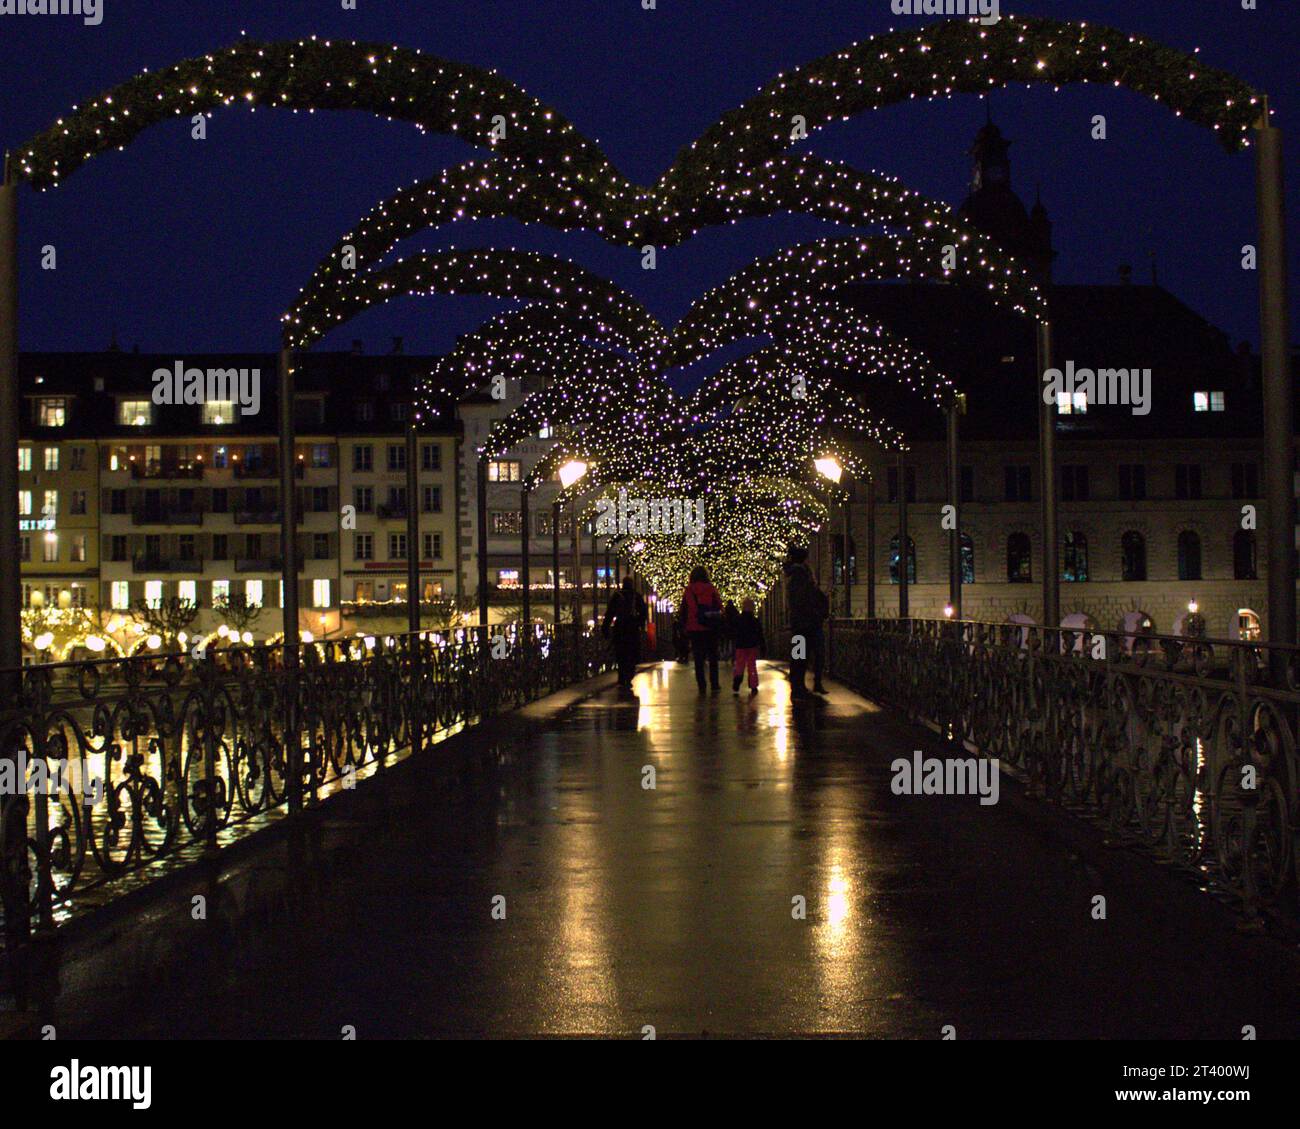 Rathaussteg bridge in Luzern, Switzerland. Seen at Christmas time covered in wreaths and fairy lights. People crossing a lit xmas bridge at night Stock Photo